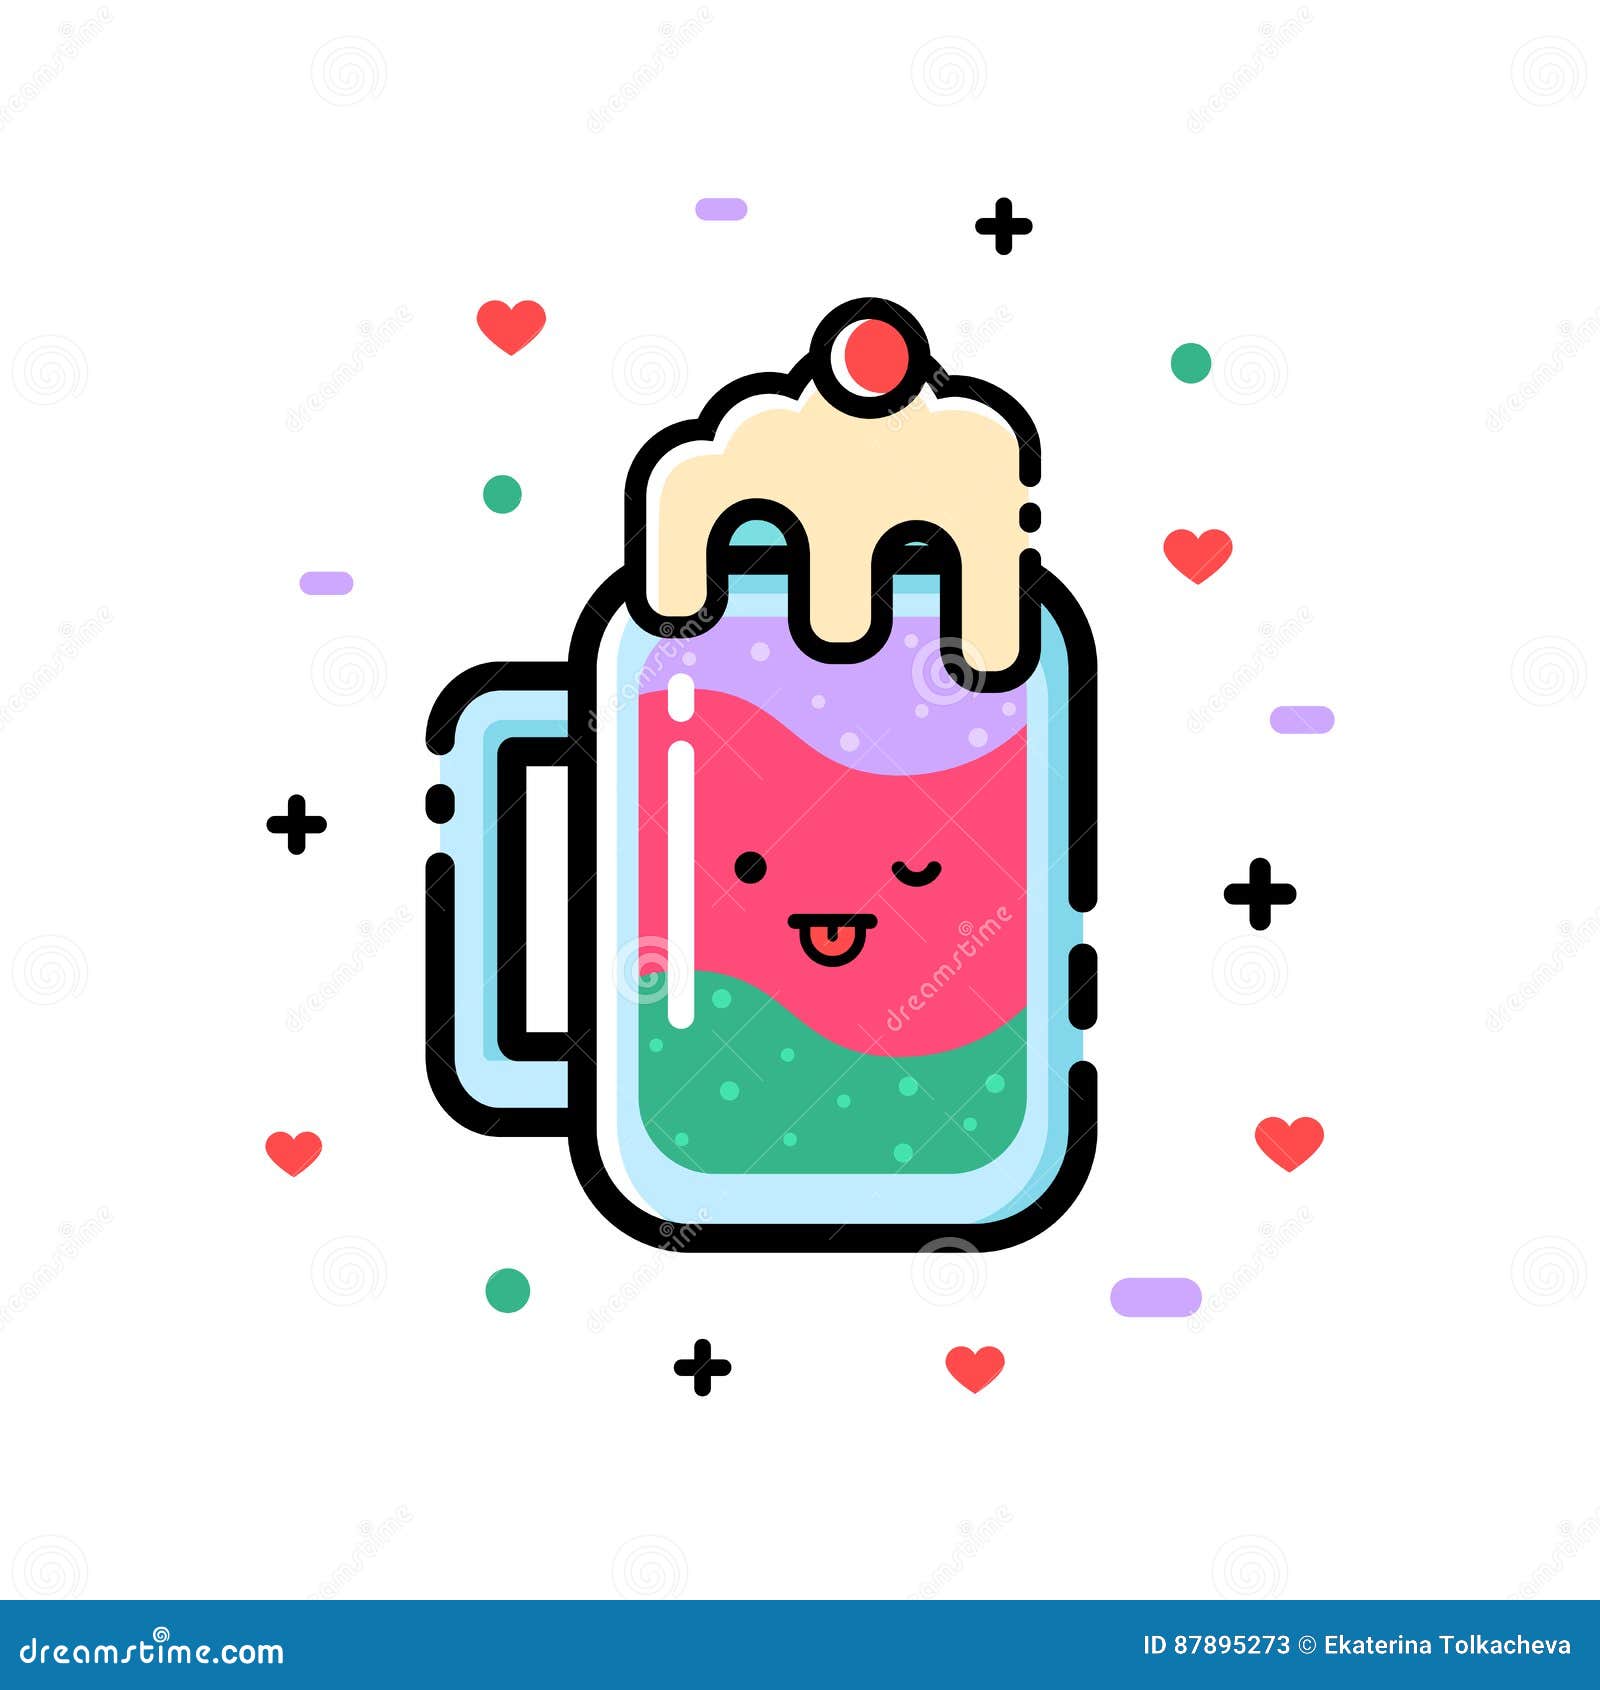 Cute cartoon fruit smoothies in cups Royalty Free Vector